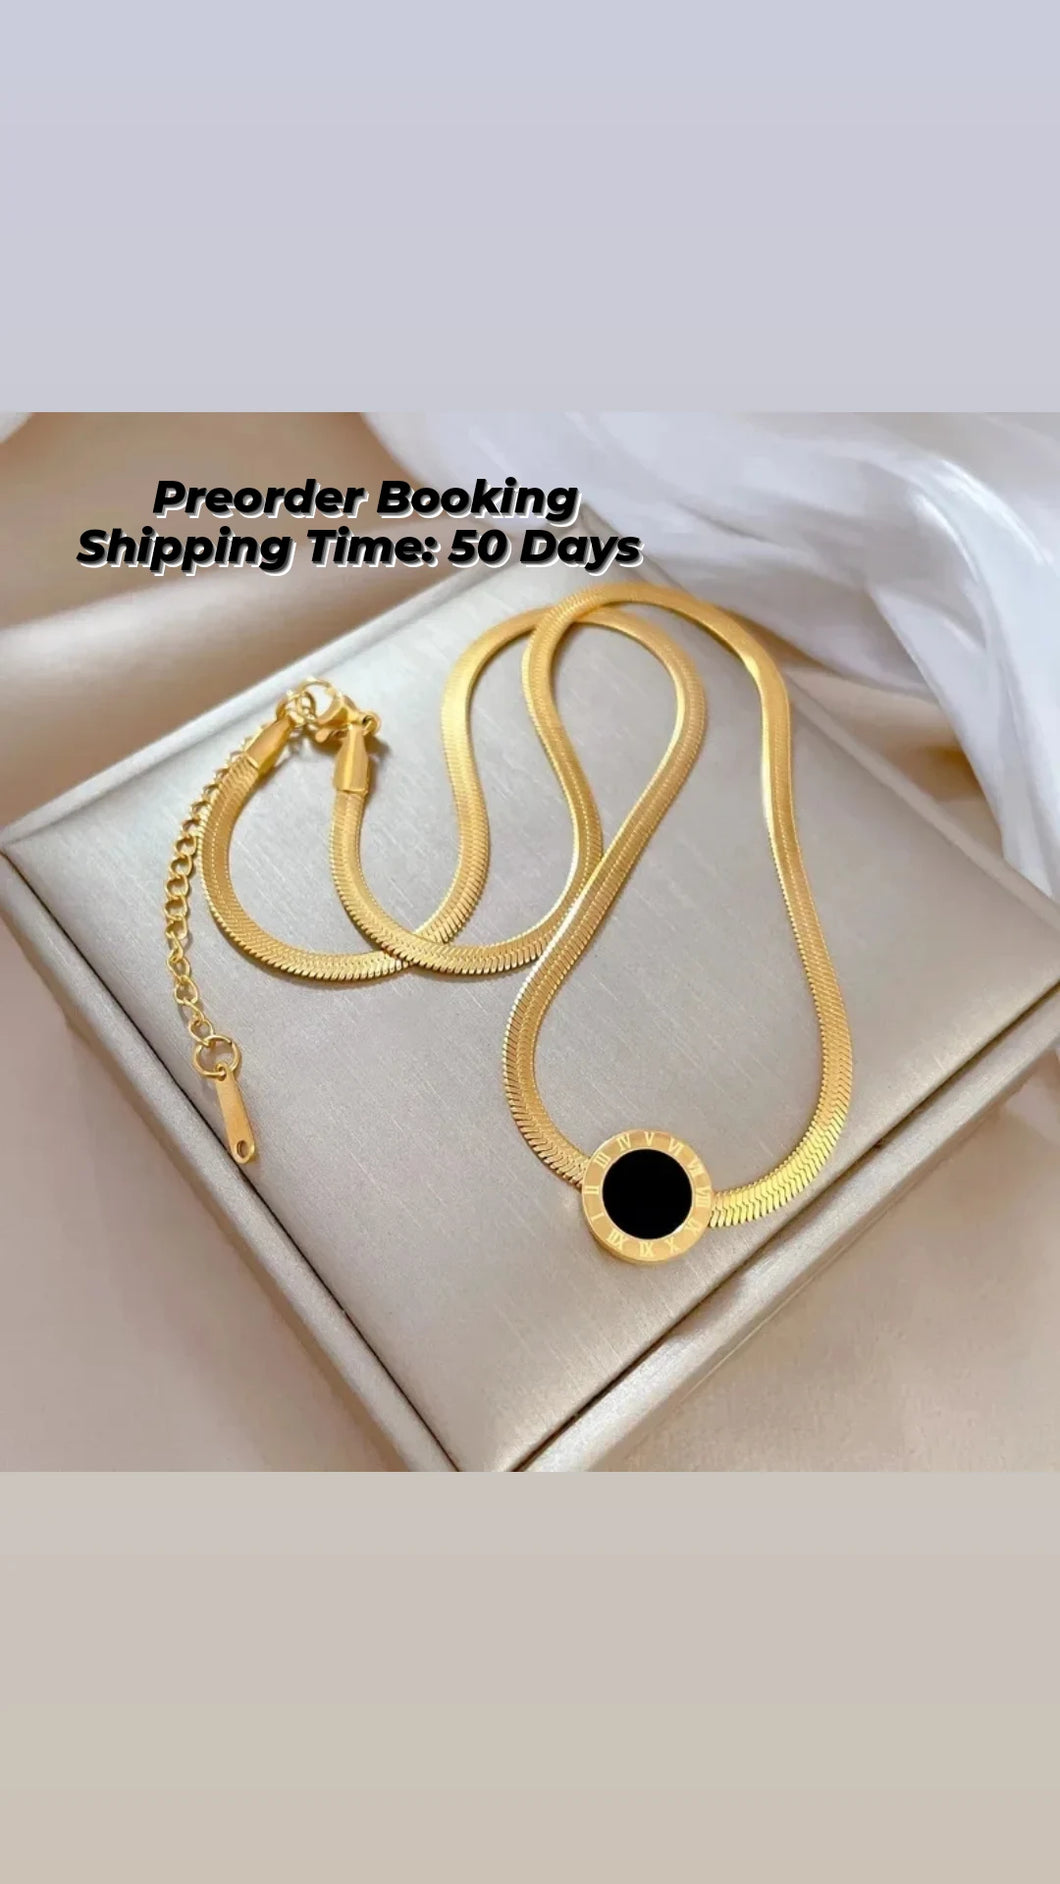 18K Gold Plated Necklace